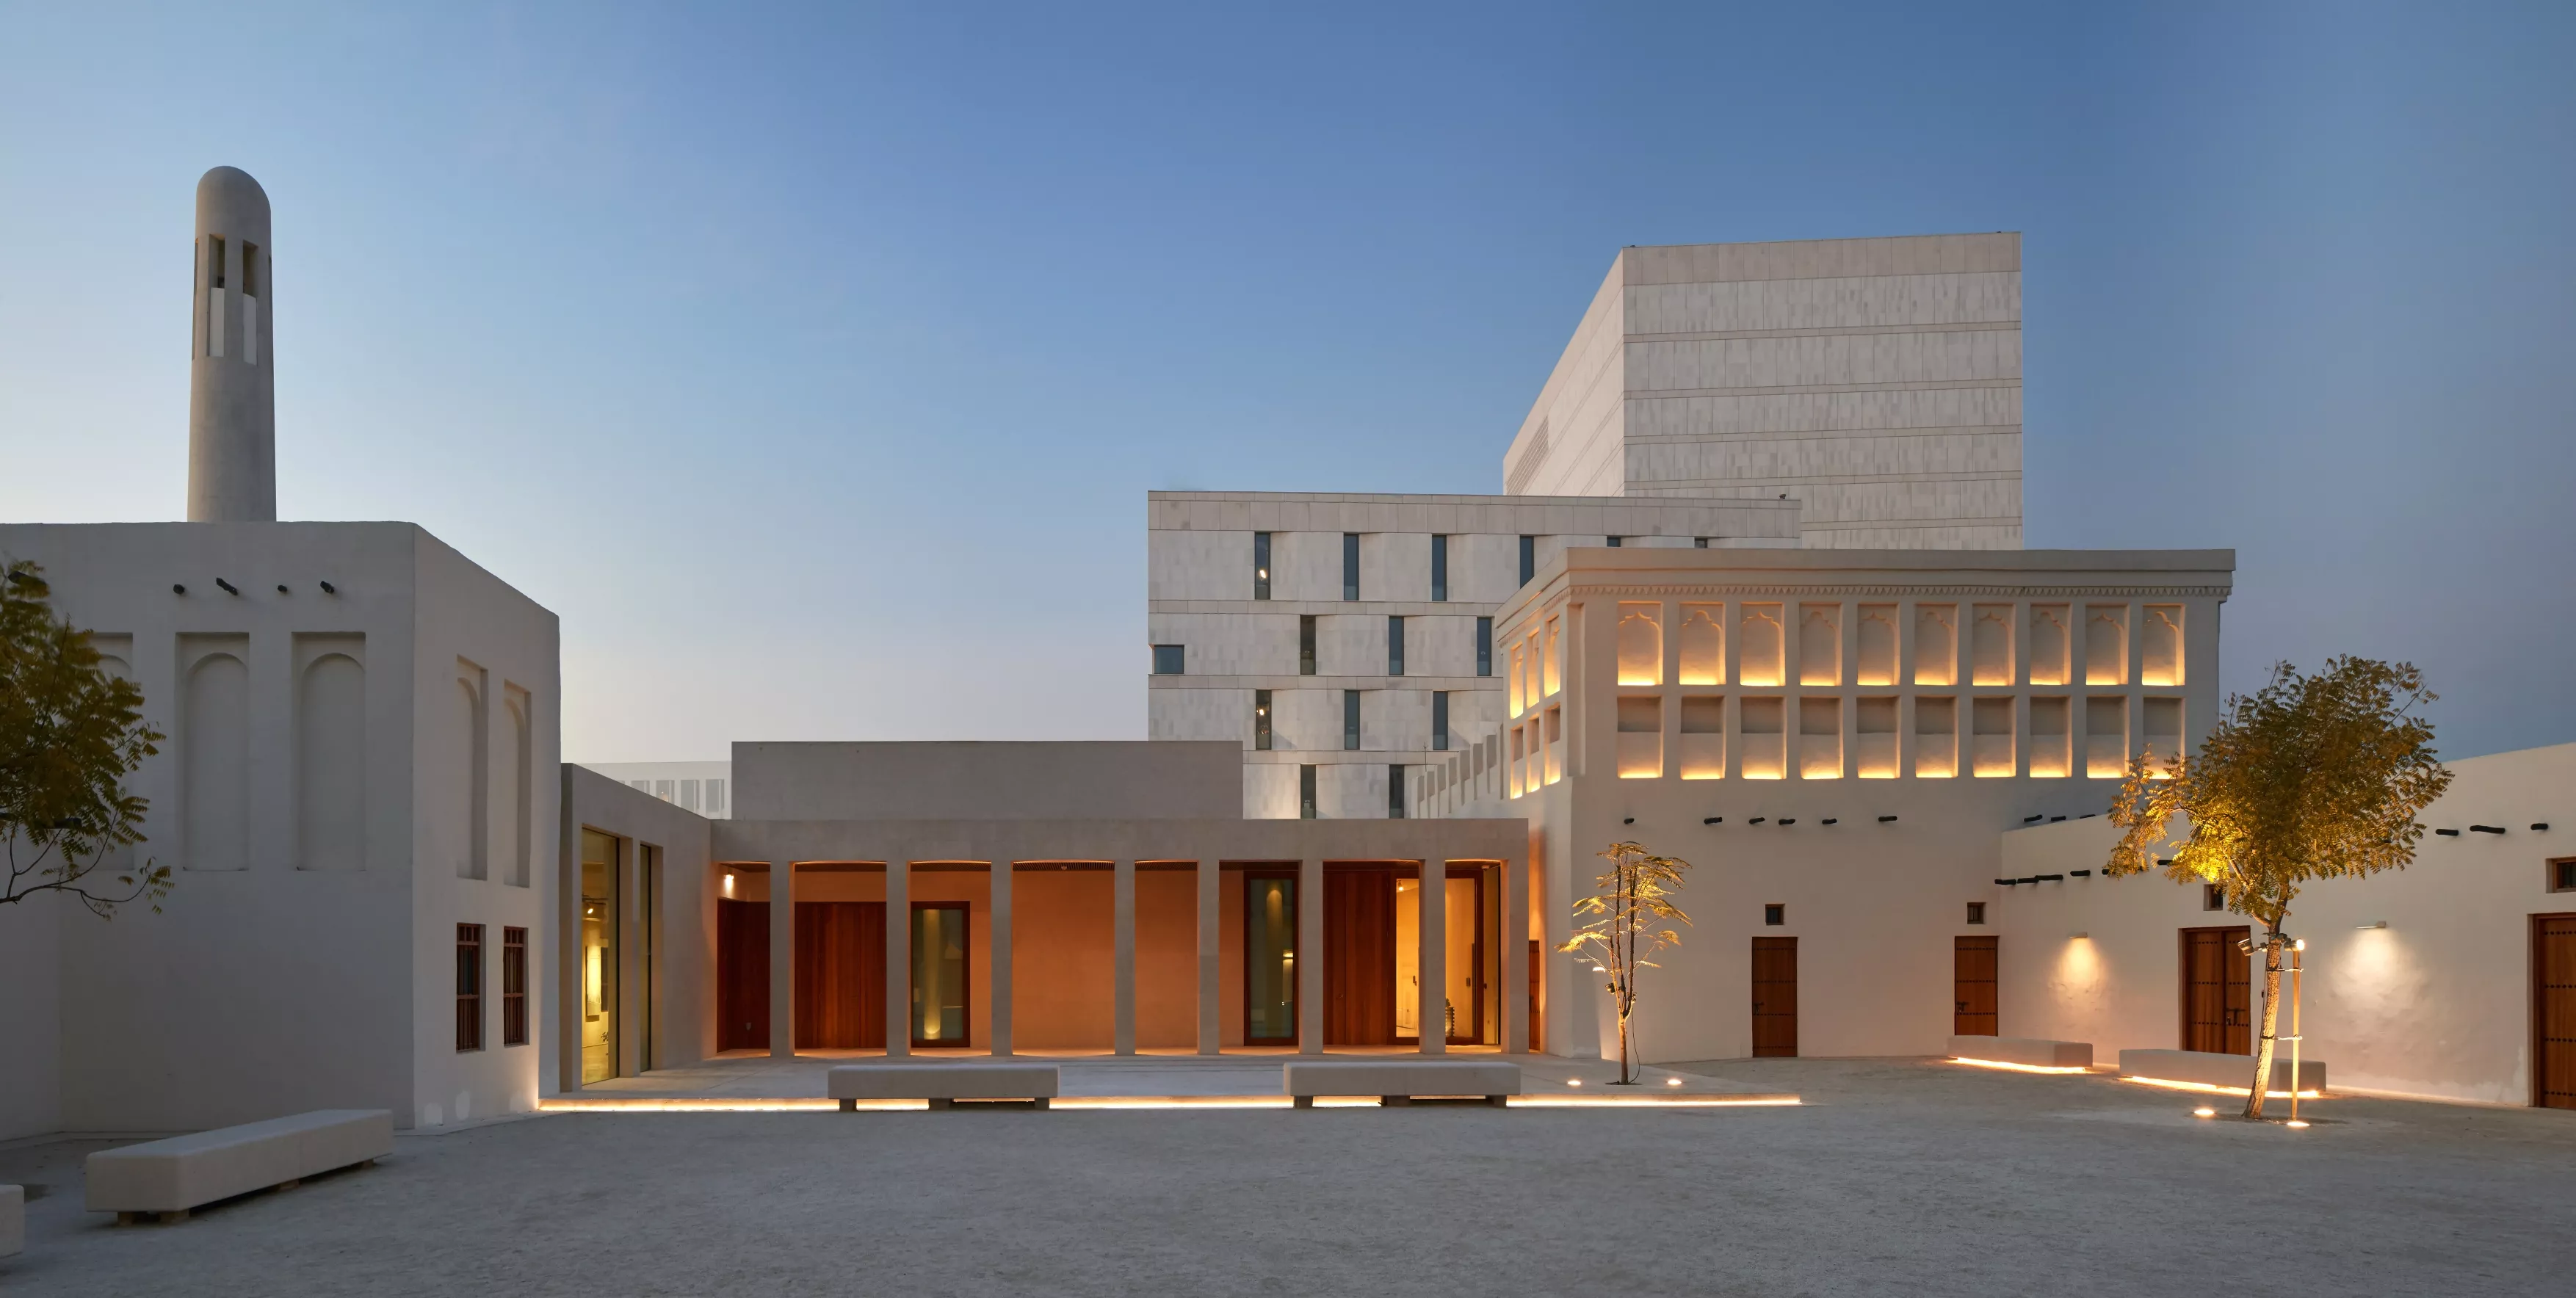 Msheireb Museums in Qatar, Middle East | Museums - Rated 3.7